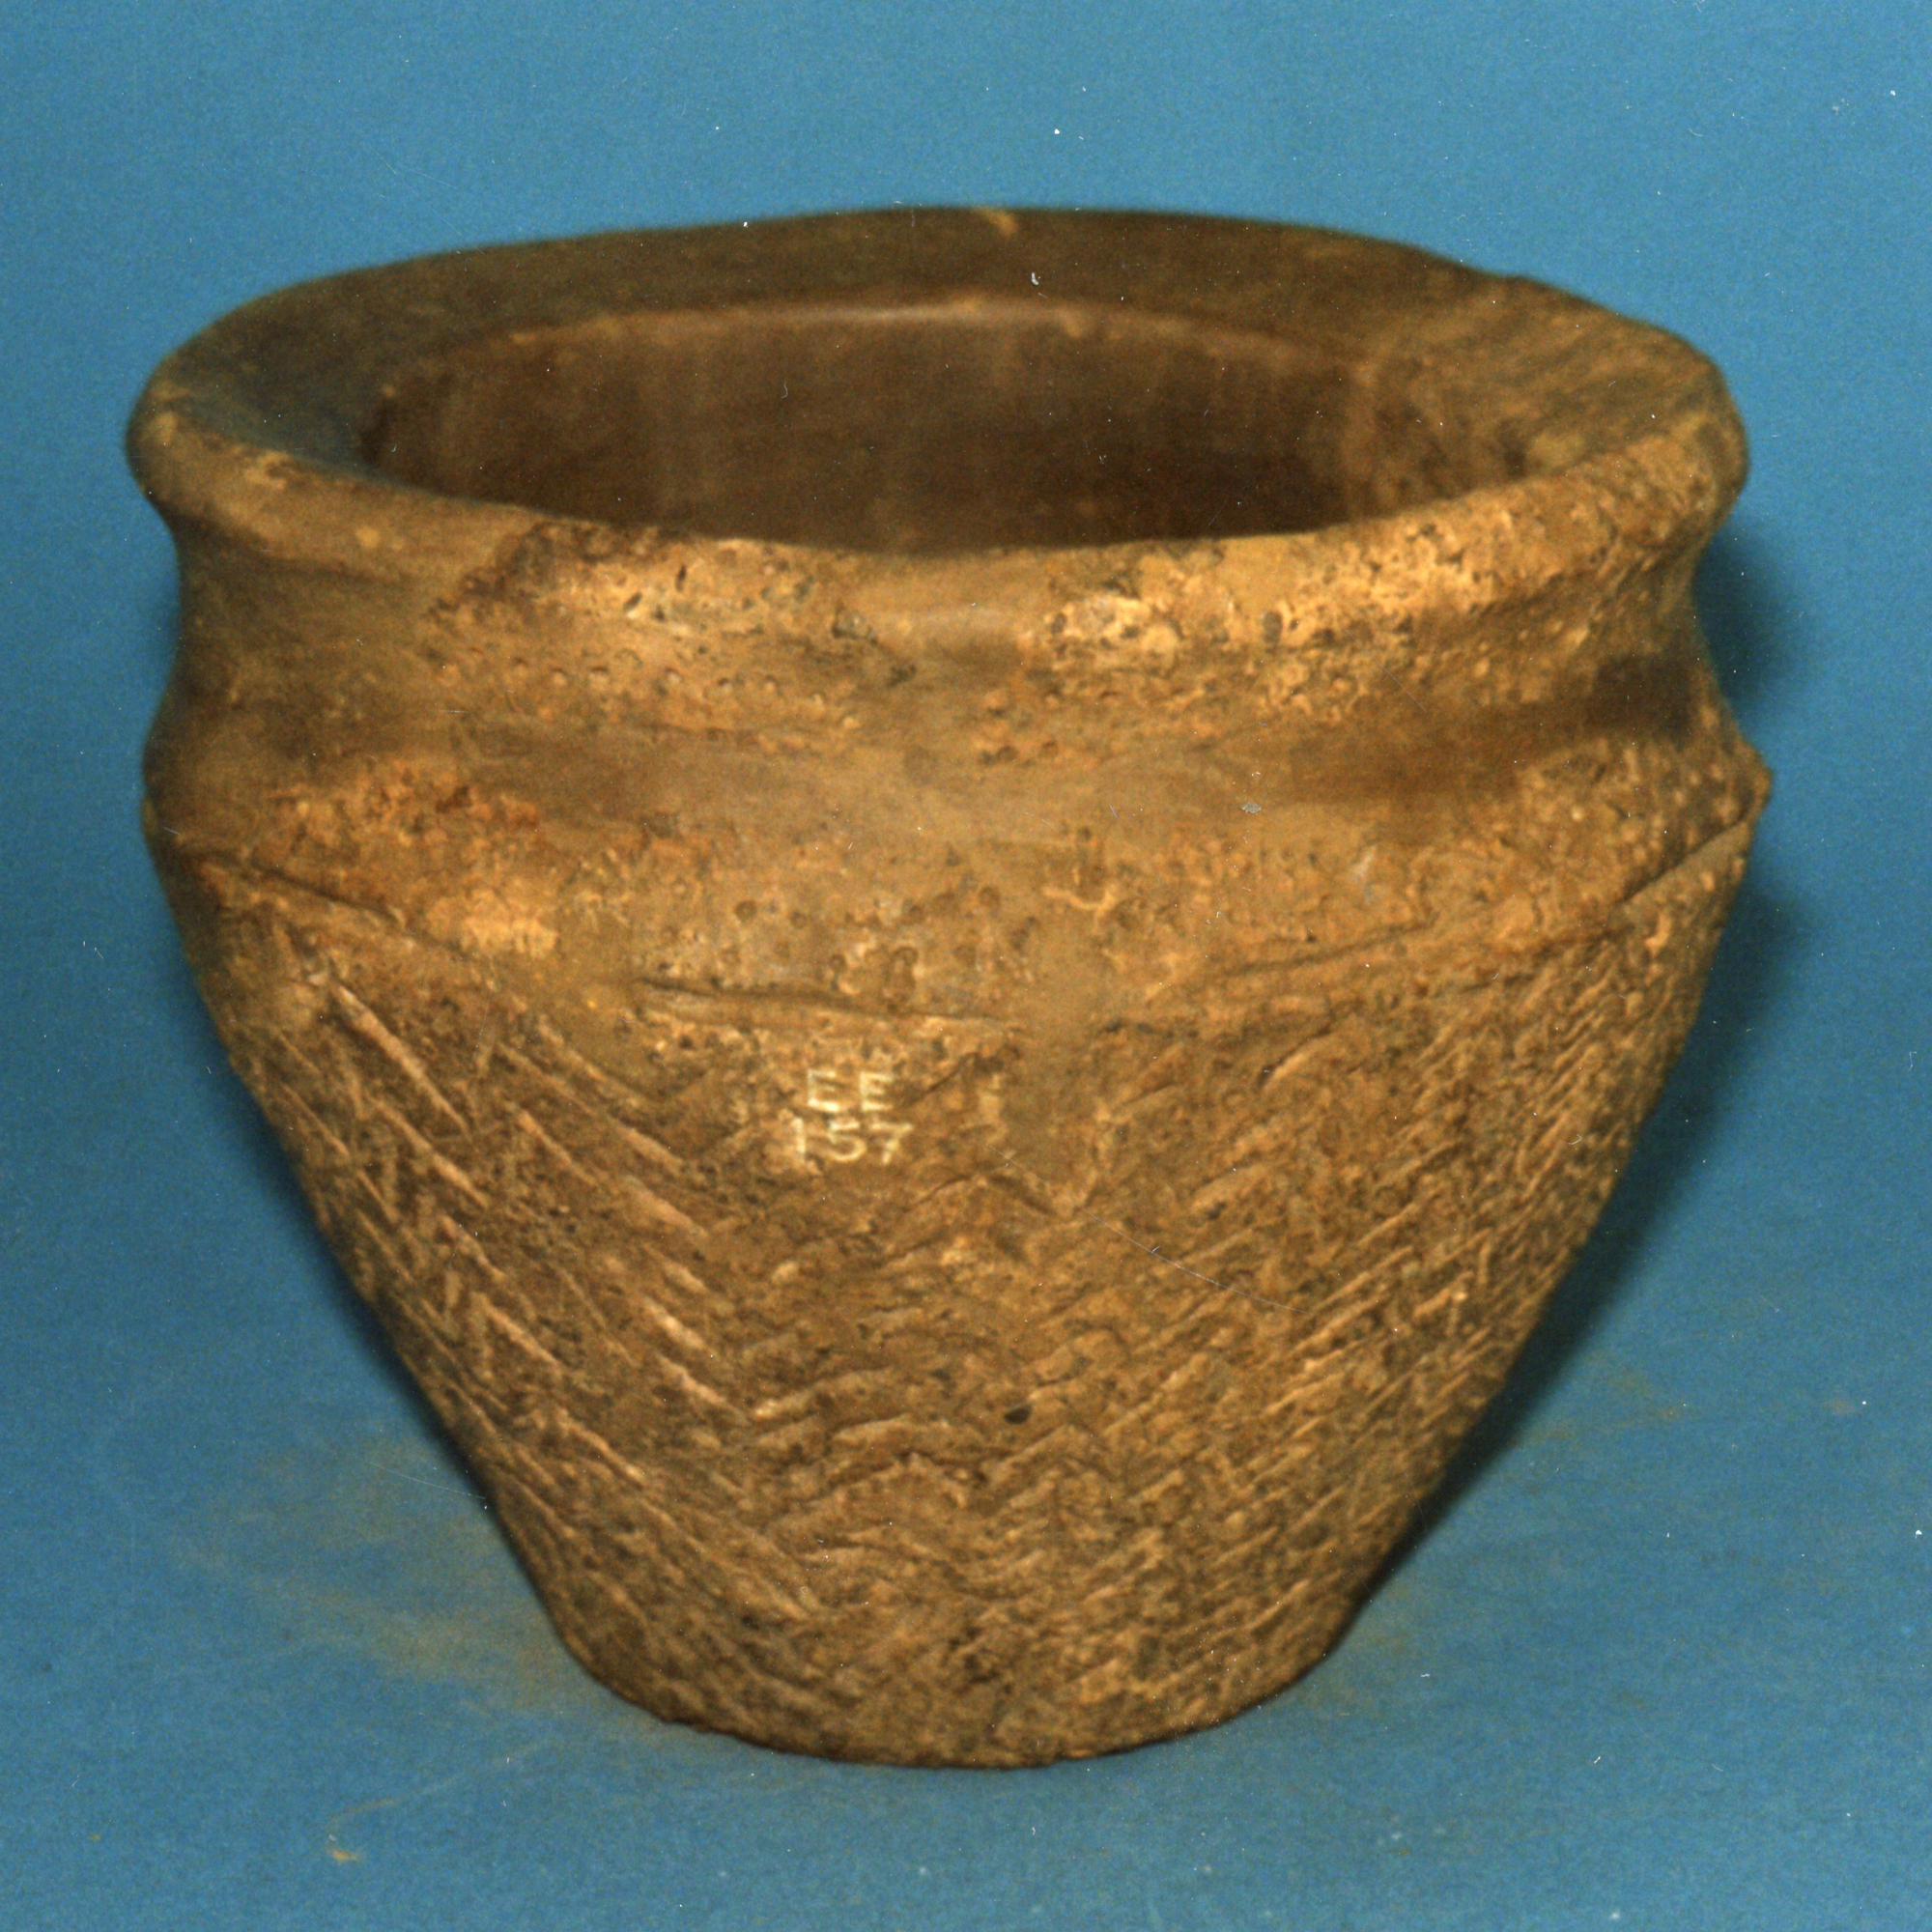 Image of Pottery food vessel, from Gribun, Mull, Argyll © National Museums Scotland